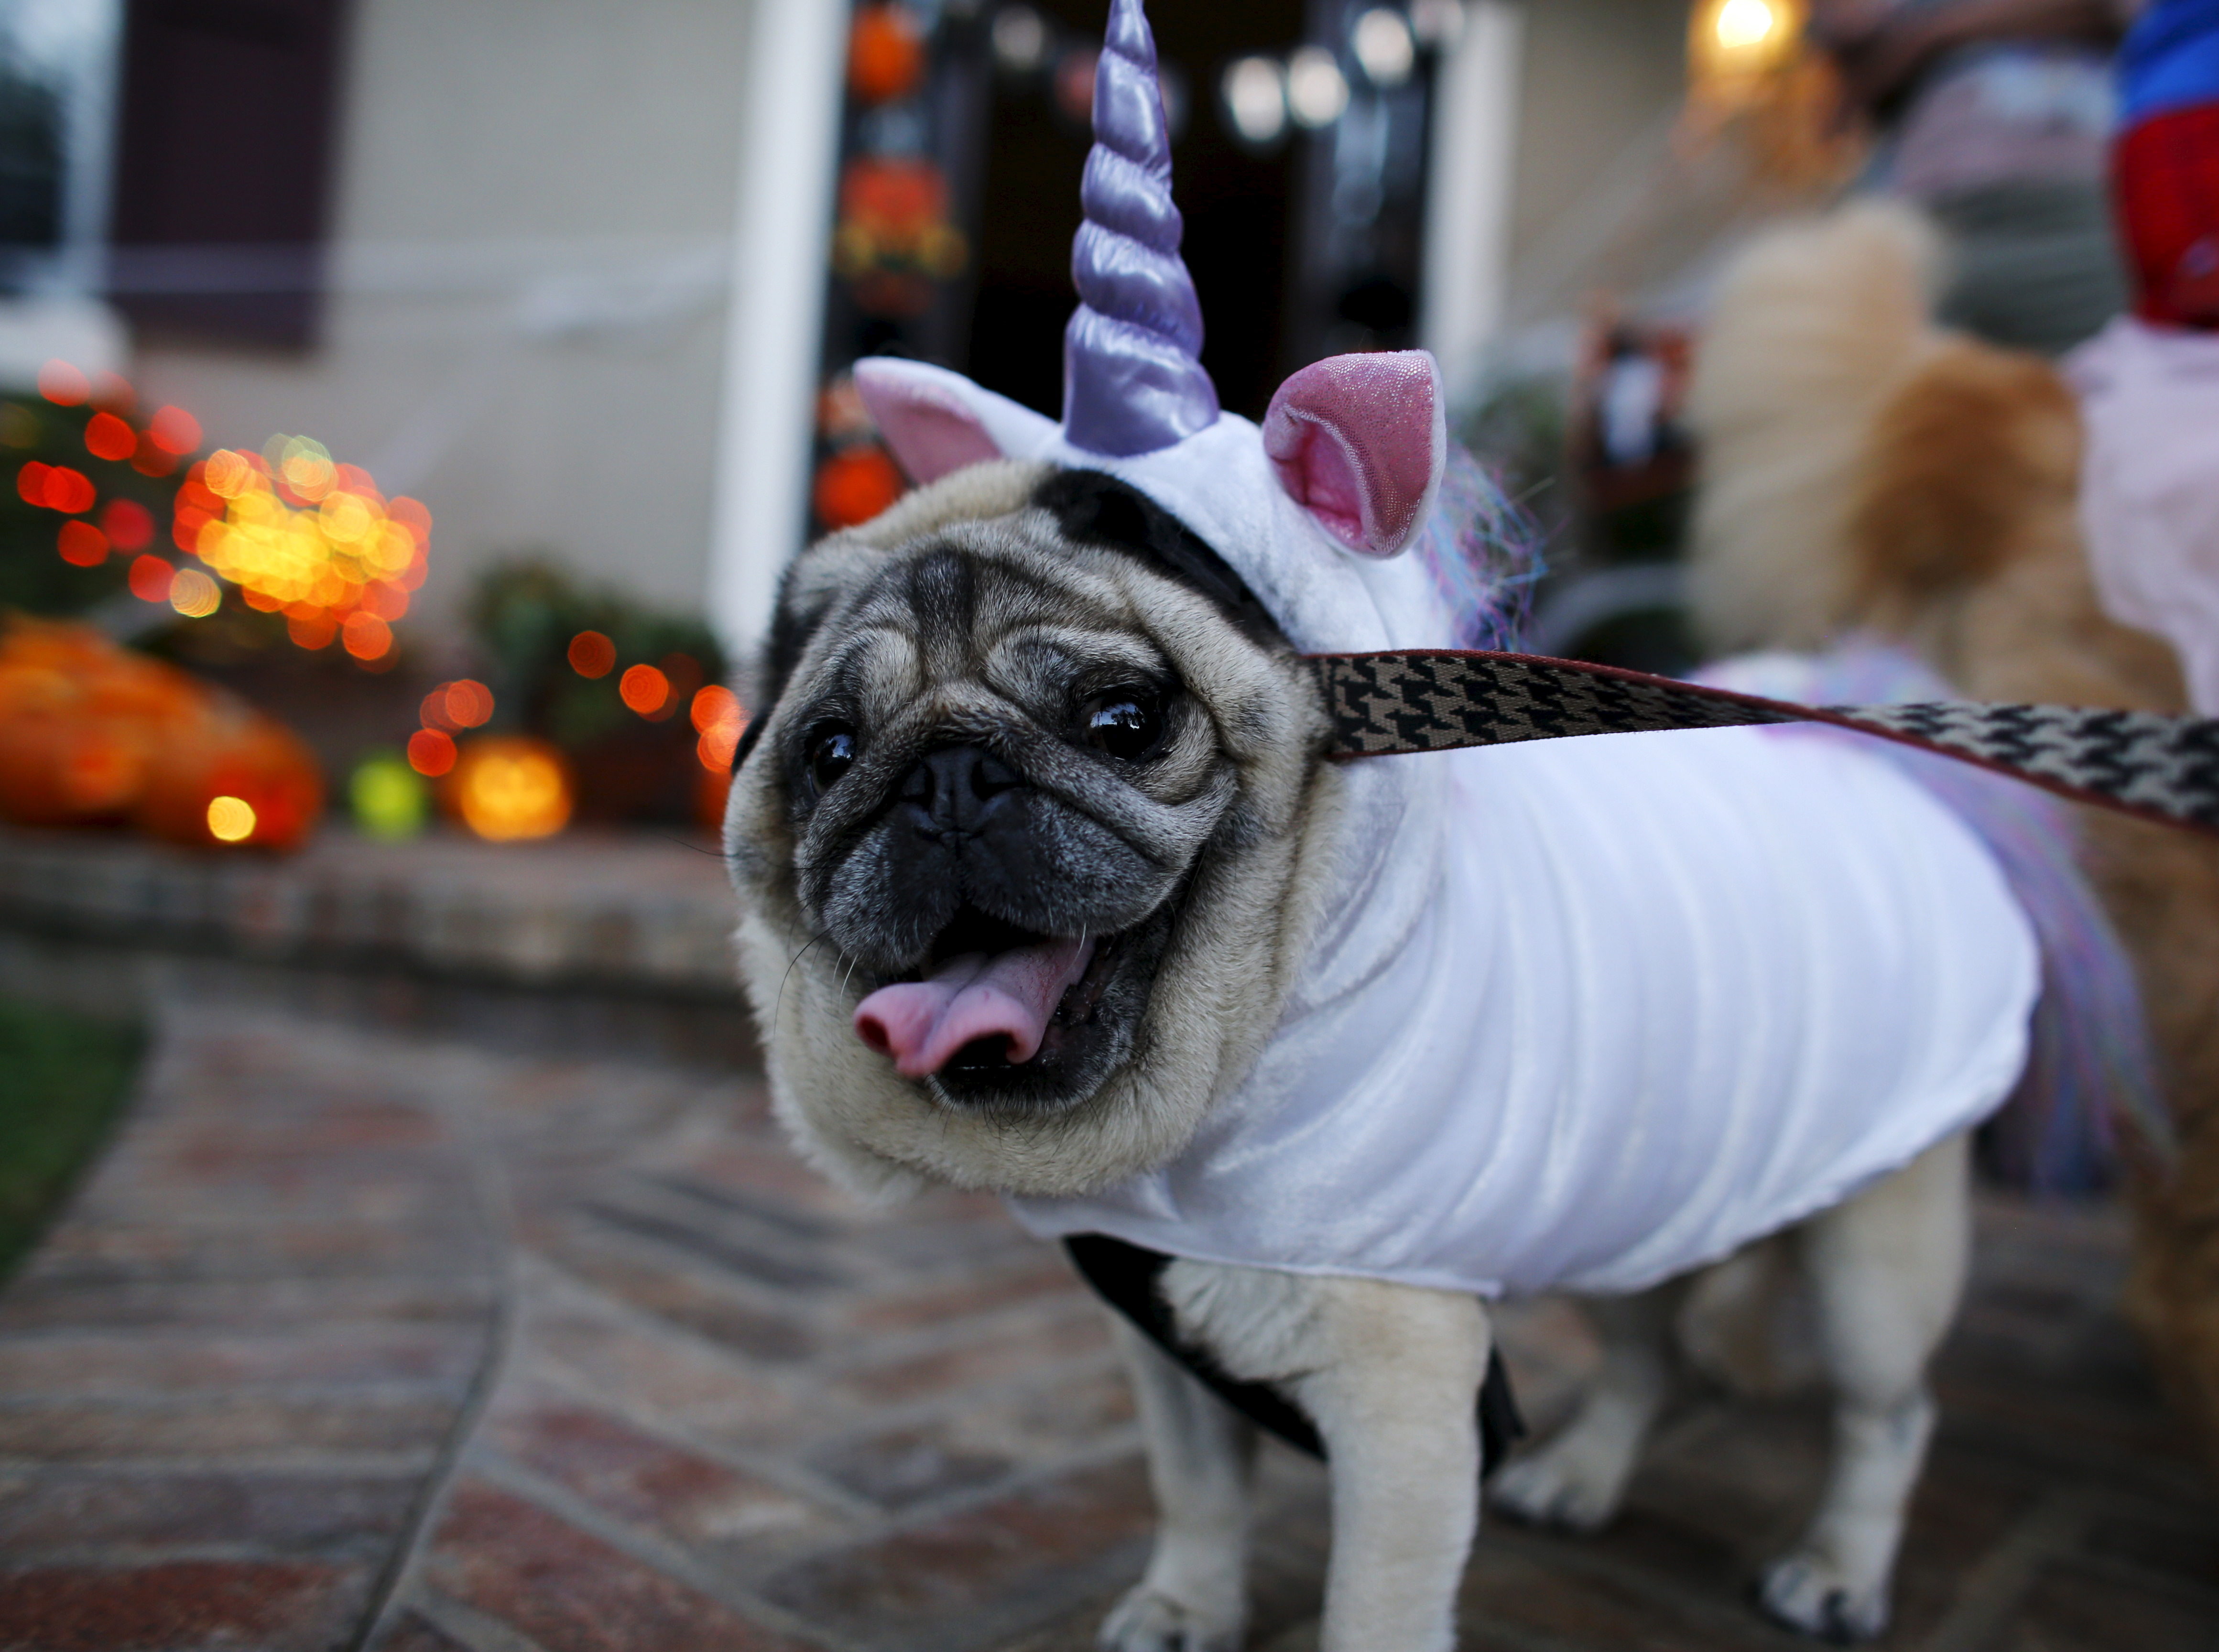 A pug dog is dressed up in costume as she trick or treats with her owners during Halloween in Encinitas, California, October 31, 2015.